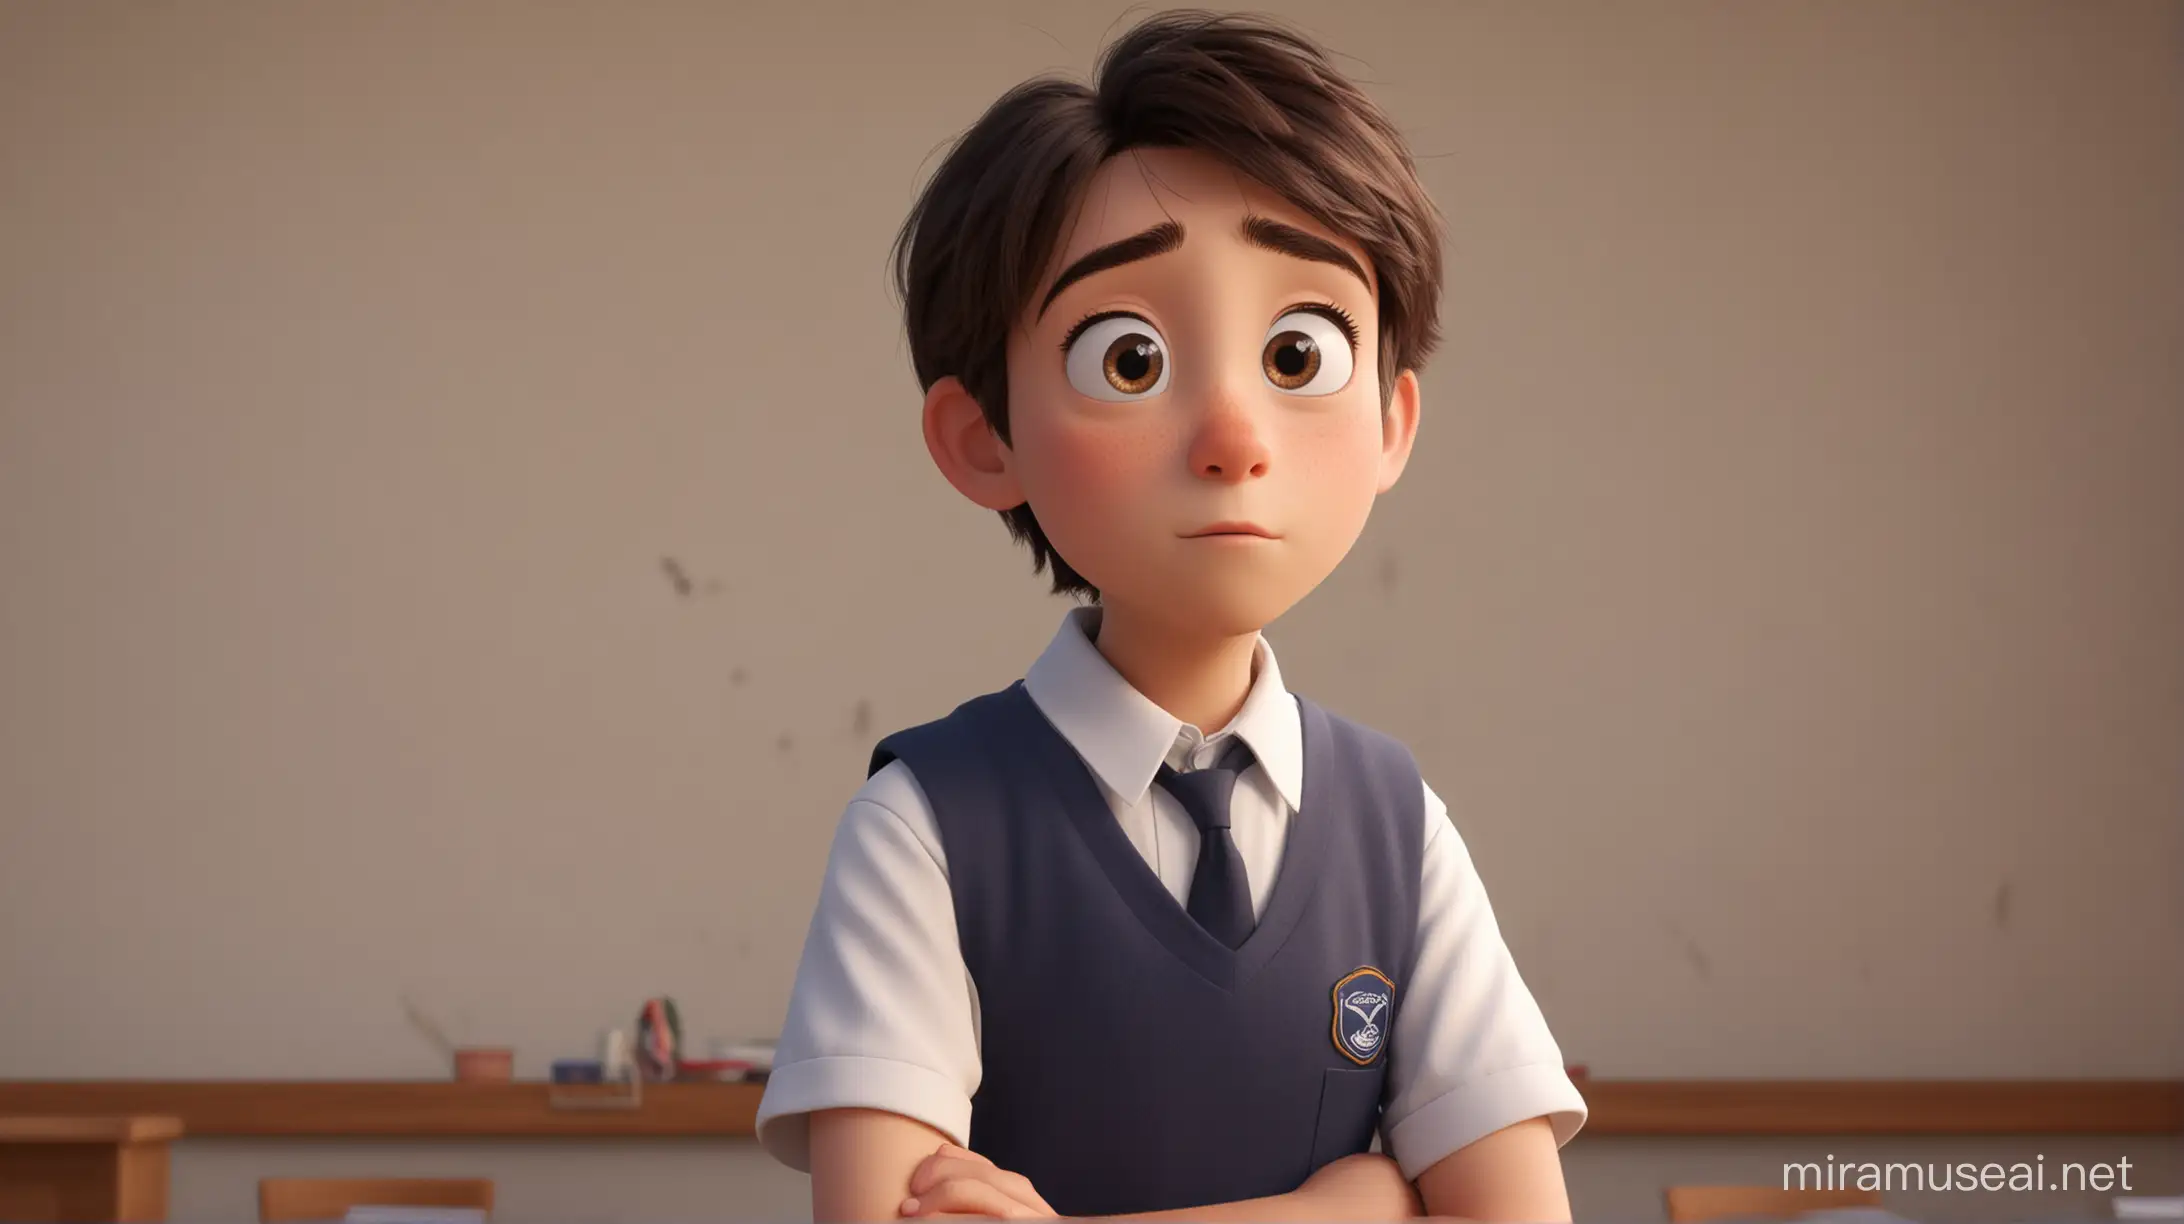  A next student character in a school uniform thinking and wondering by the hands of Cinematic and Pixar